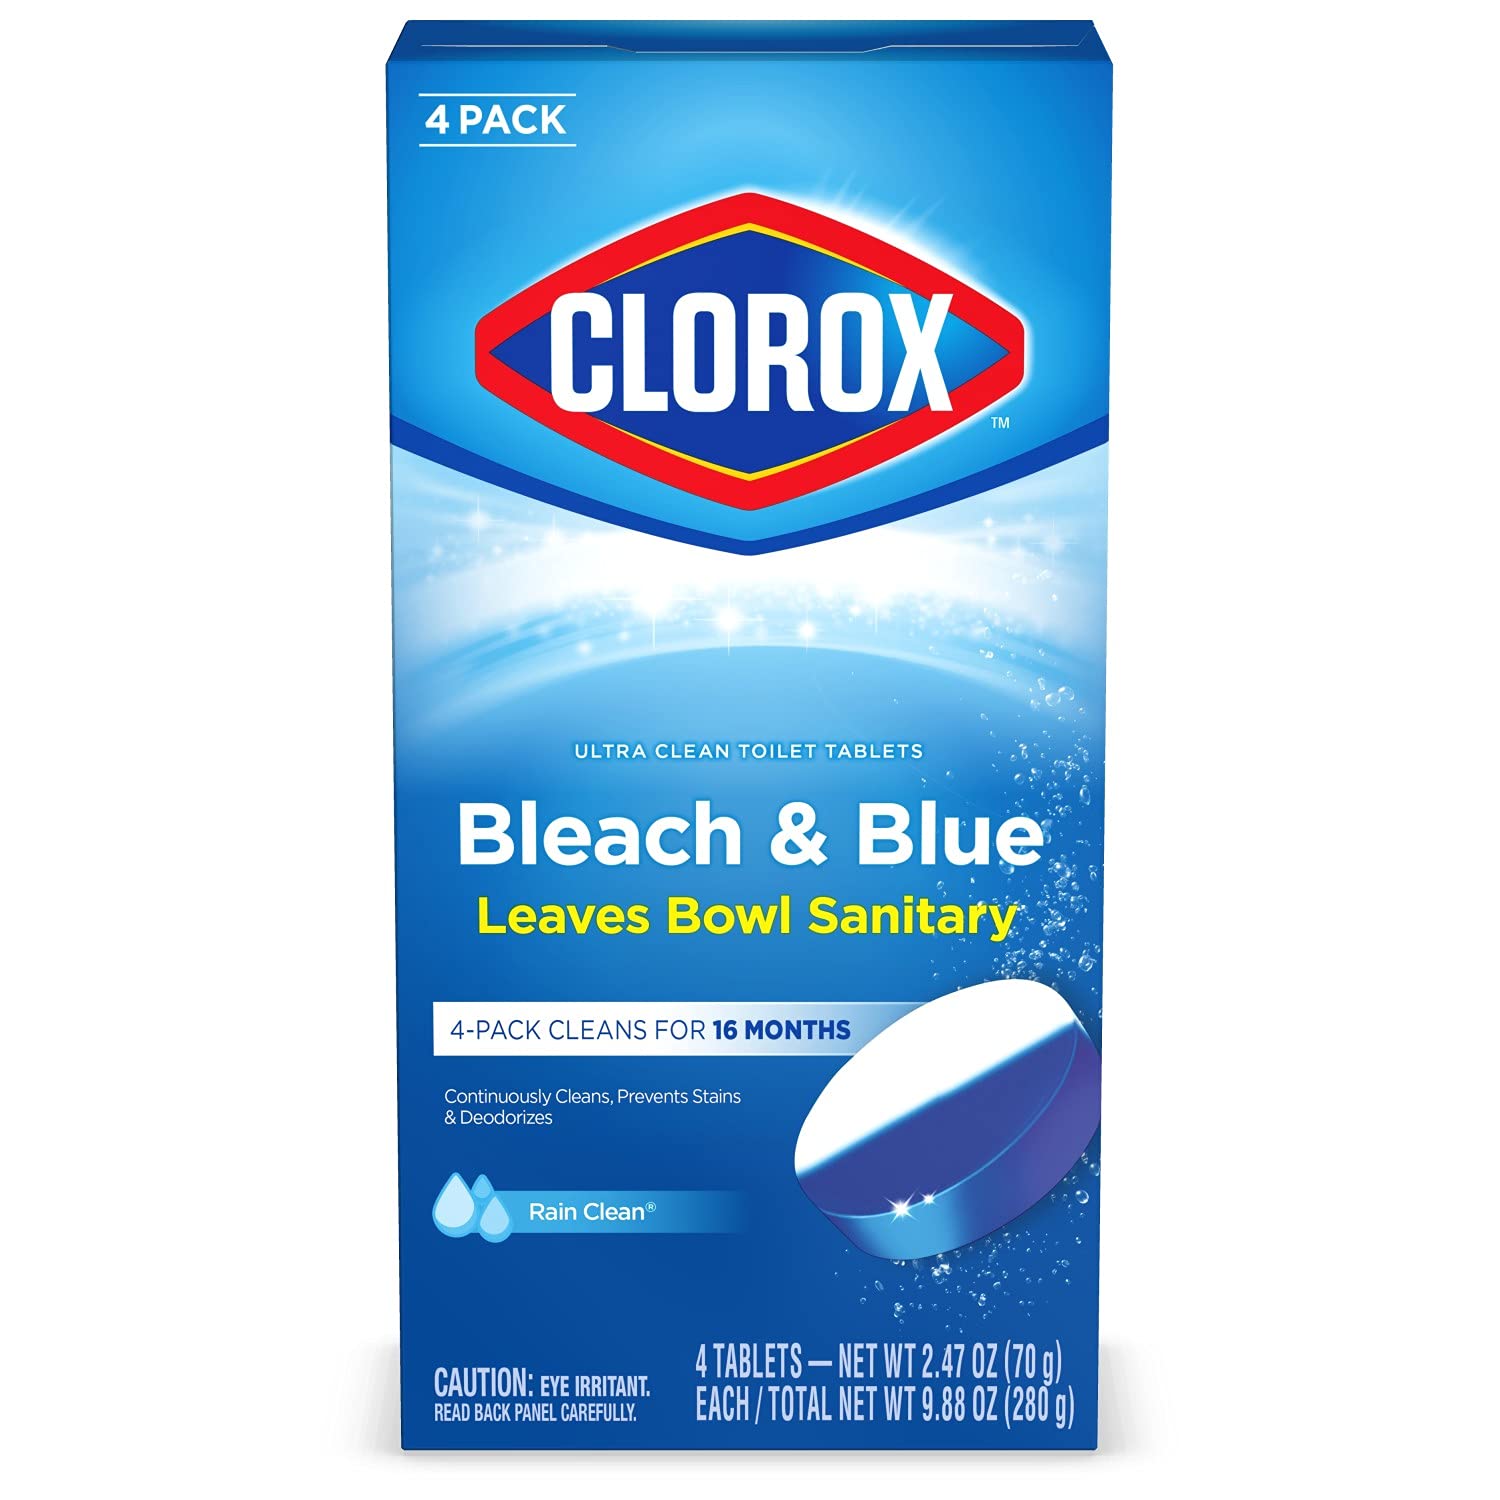 [ PrimeDay] Clorox Ultra Clean Toilet Tablets Bleach & Blue, Rain Clean Scent 2.47 Ounces Each, 4 Count (Package May Vary) $7.9